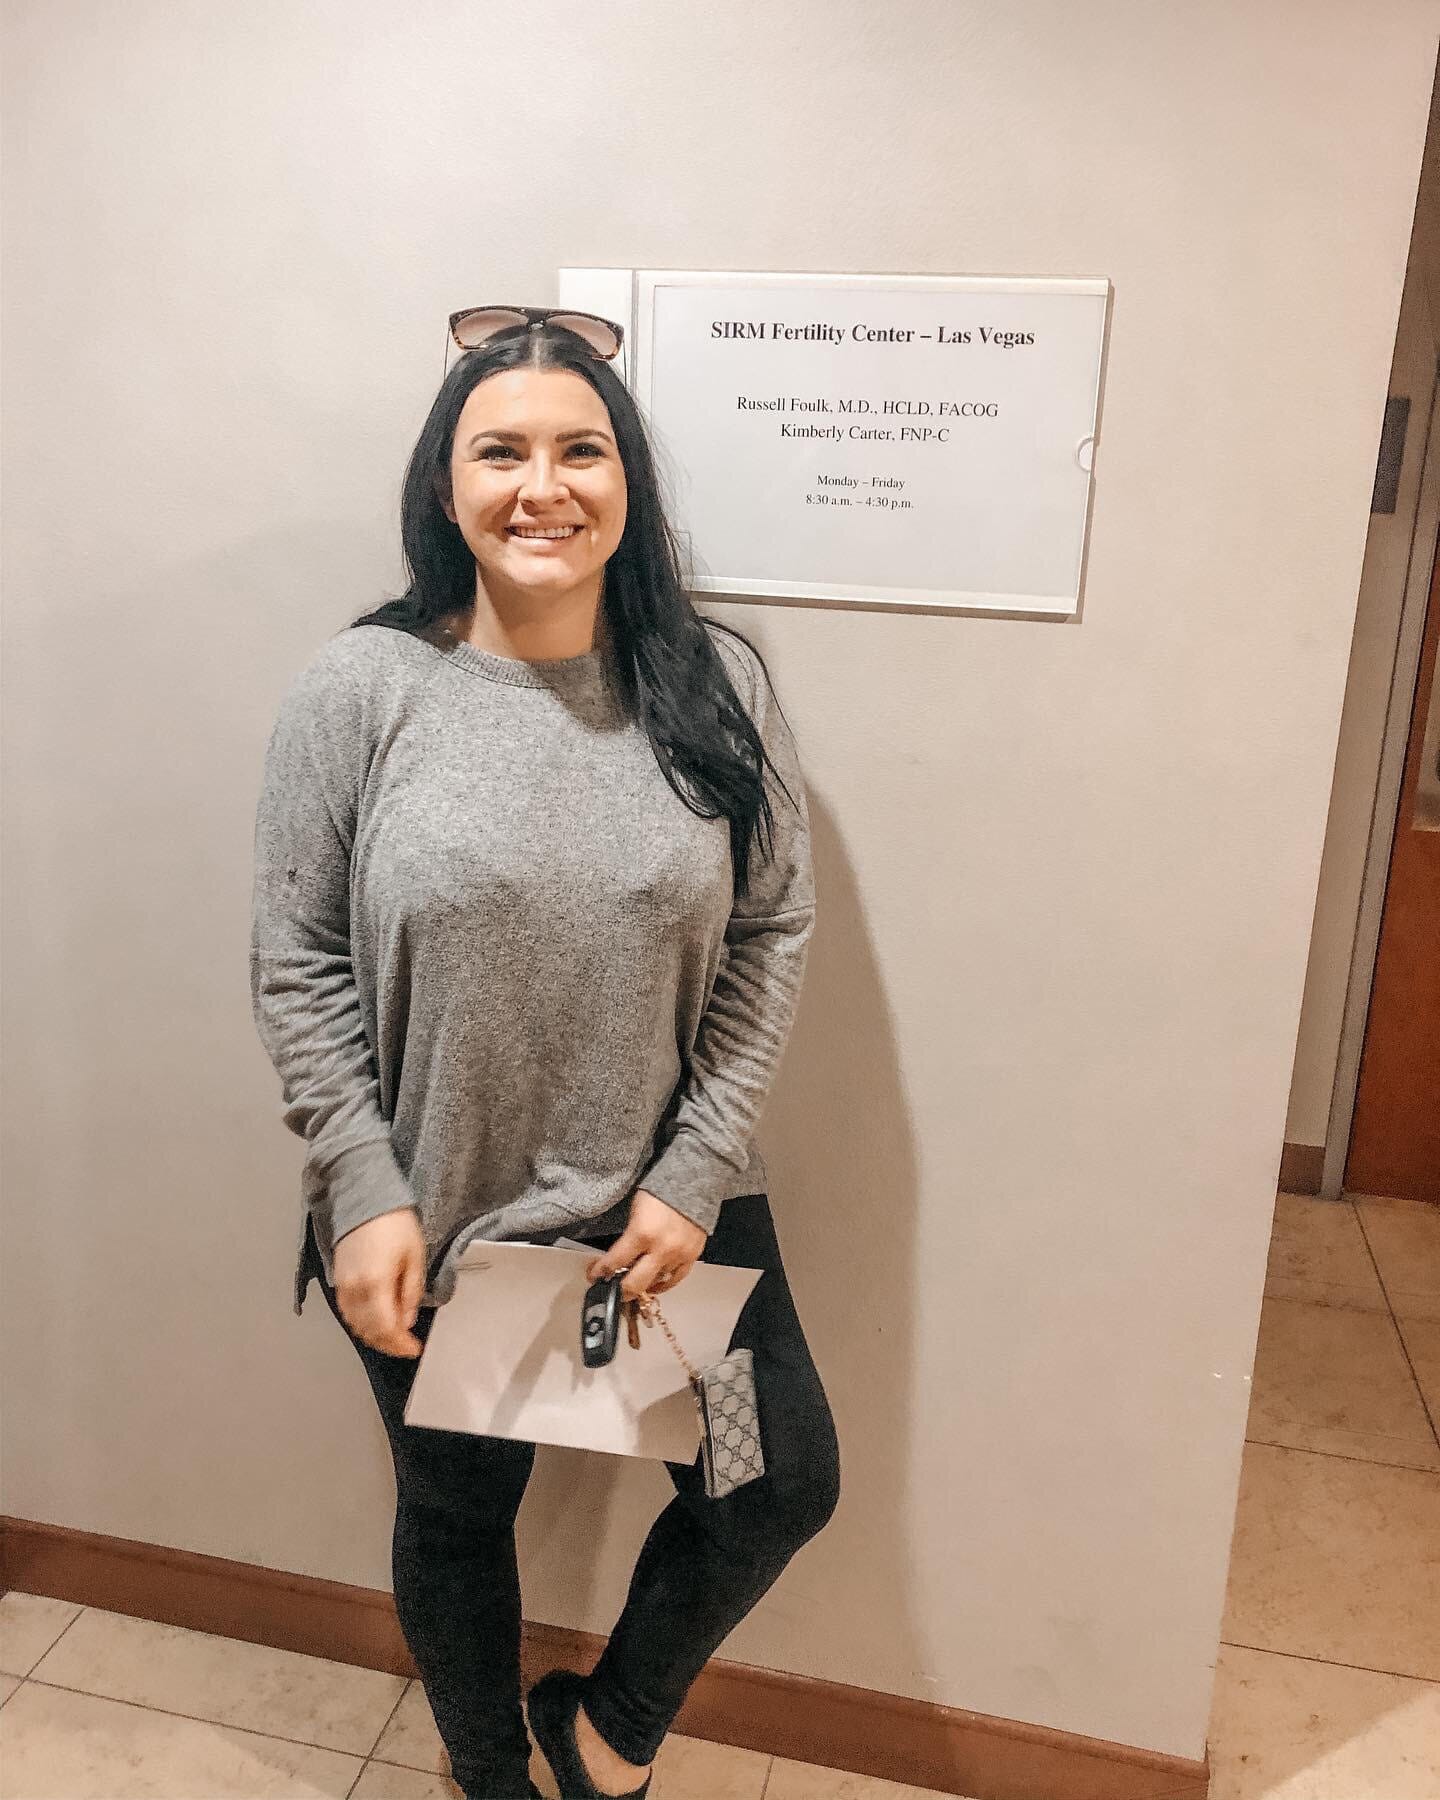 kaitlin mcfarland at the sirm fertility center in las vegas nevada